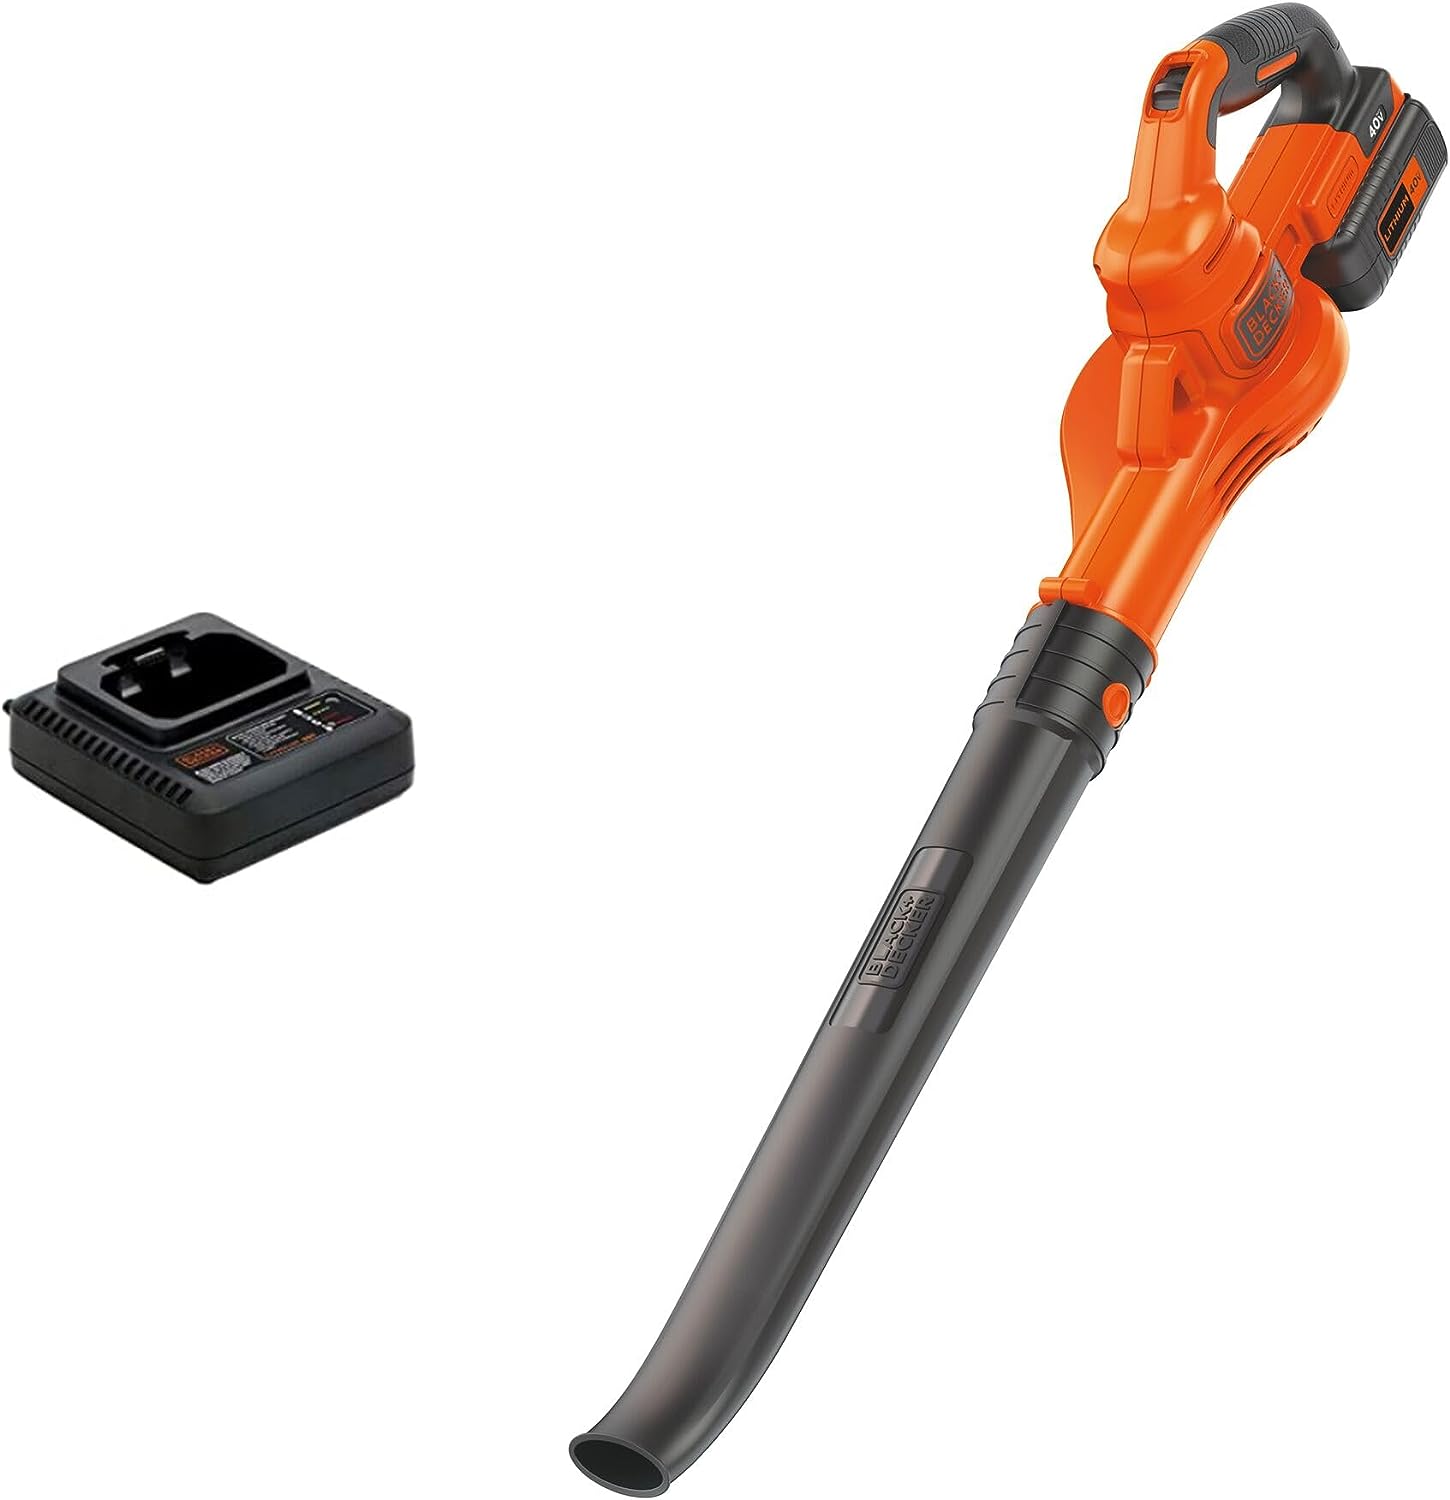 https://bigbigmart.com/wp-content/uploads/2023/08/BLACKDECKER-40V-MAX-Cordless-Leaf-Blower-Lawn-Sweeper-125-mph-Air-Speed-Lightweight-Design-Battery-and-Charger-Included-LSW40C3.jpg